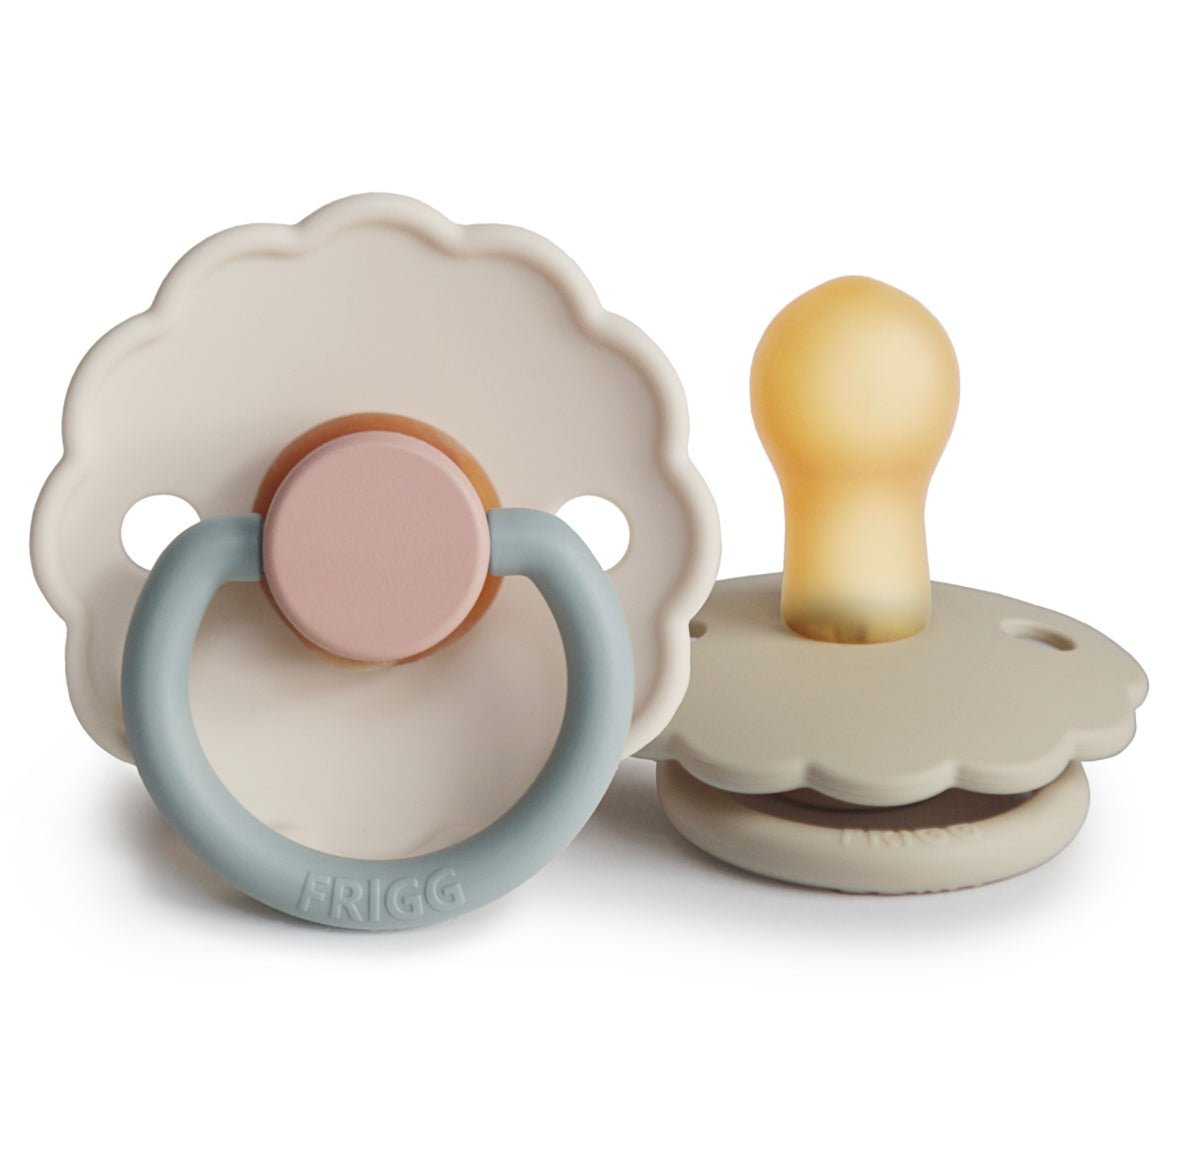 FRIGG Daisy Natural Rubber Pacifier Colorblock (Cotton Candy/Sandstone) - Harp Angel Boutique